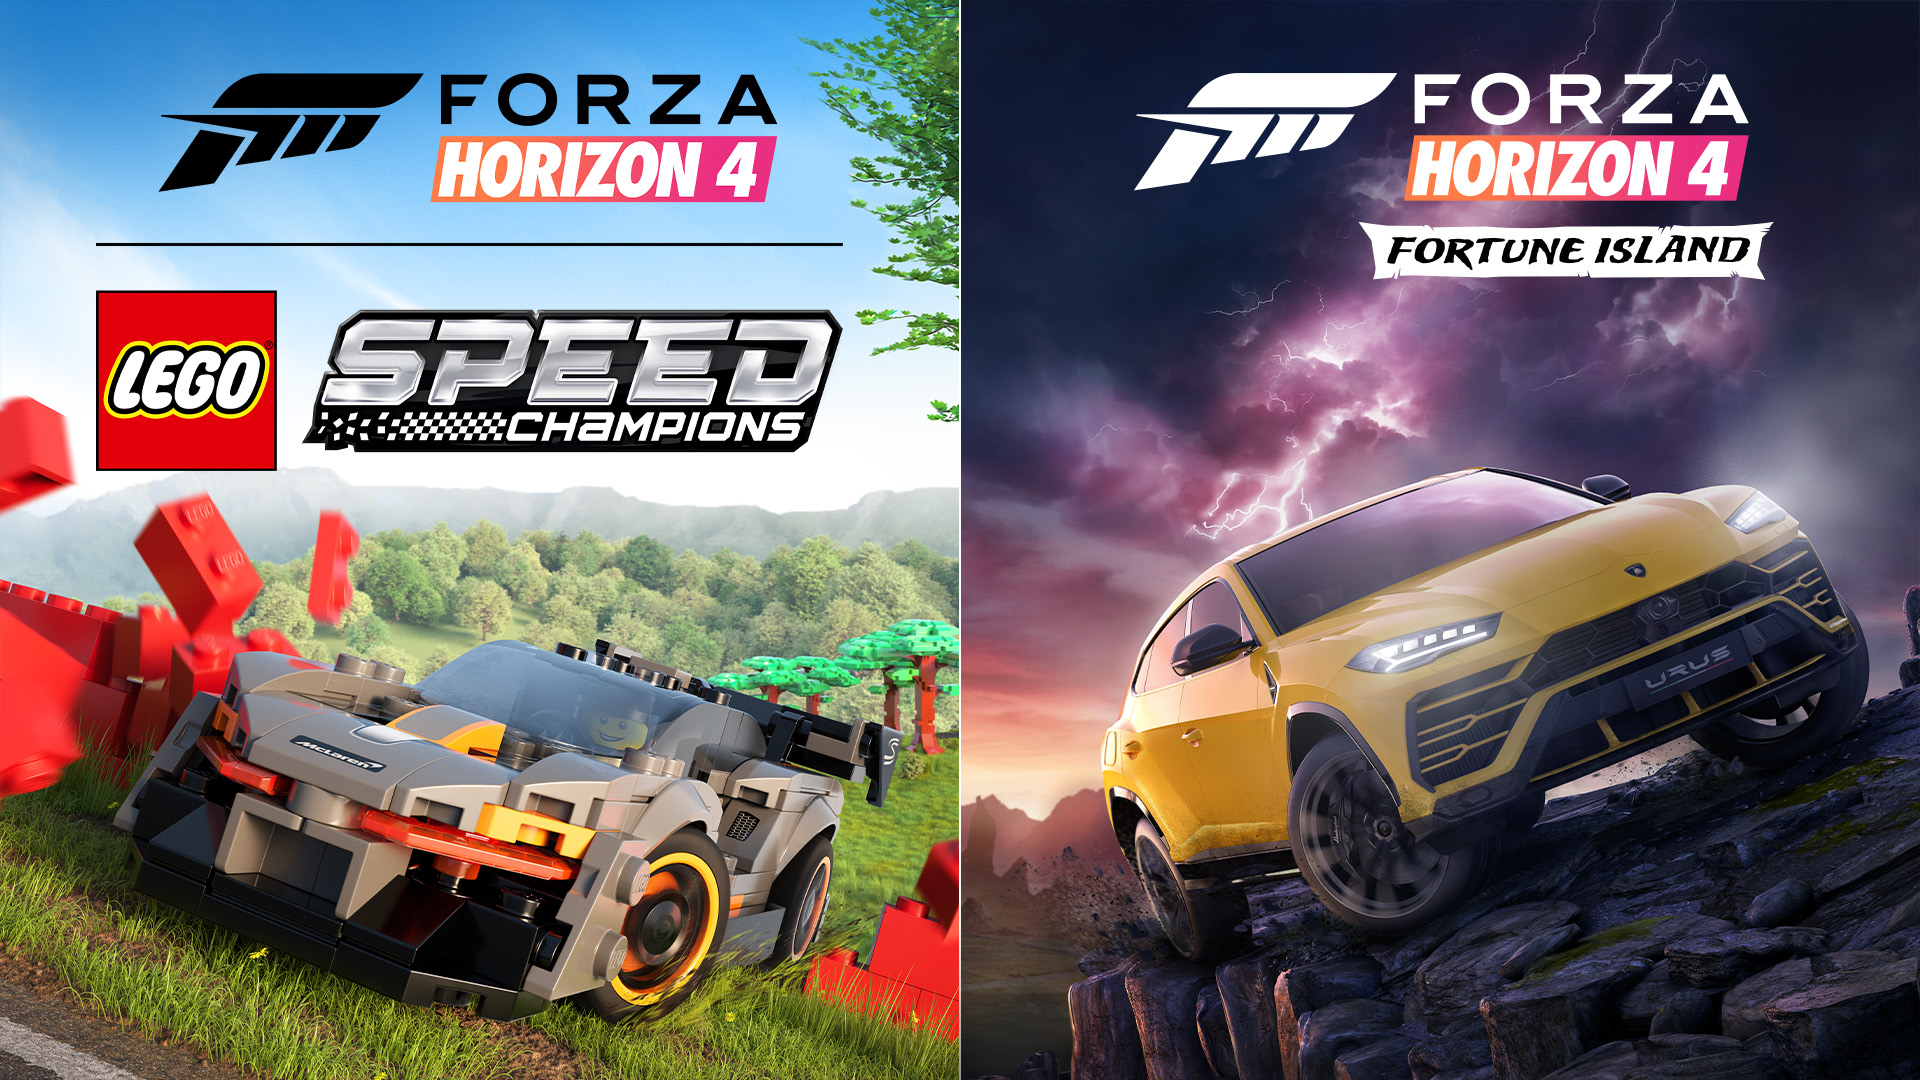 chap fårehyrde legeplads Forza Horizon on Twitter: "This month, #ForzaHorizon4 DLC is discounted in  the @MicrosoftStore. You can build your collection at @LEGO Speed  Champions, or seek your fortune on the treacherous Fortune Island.  https://t.co/NetBTk5iIC" /